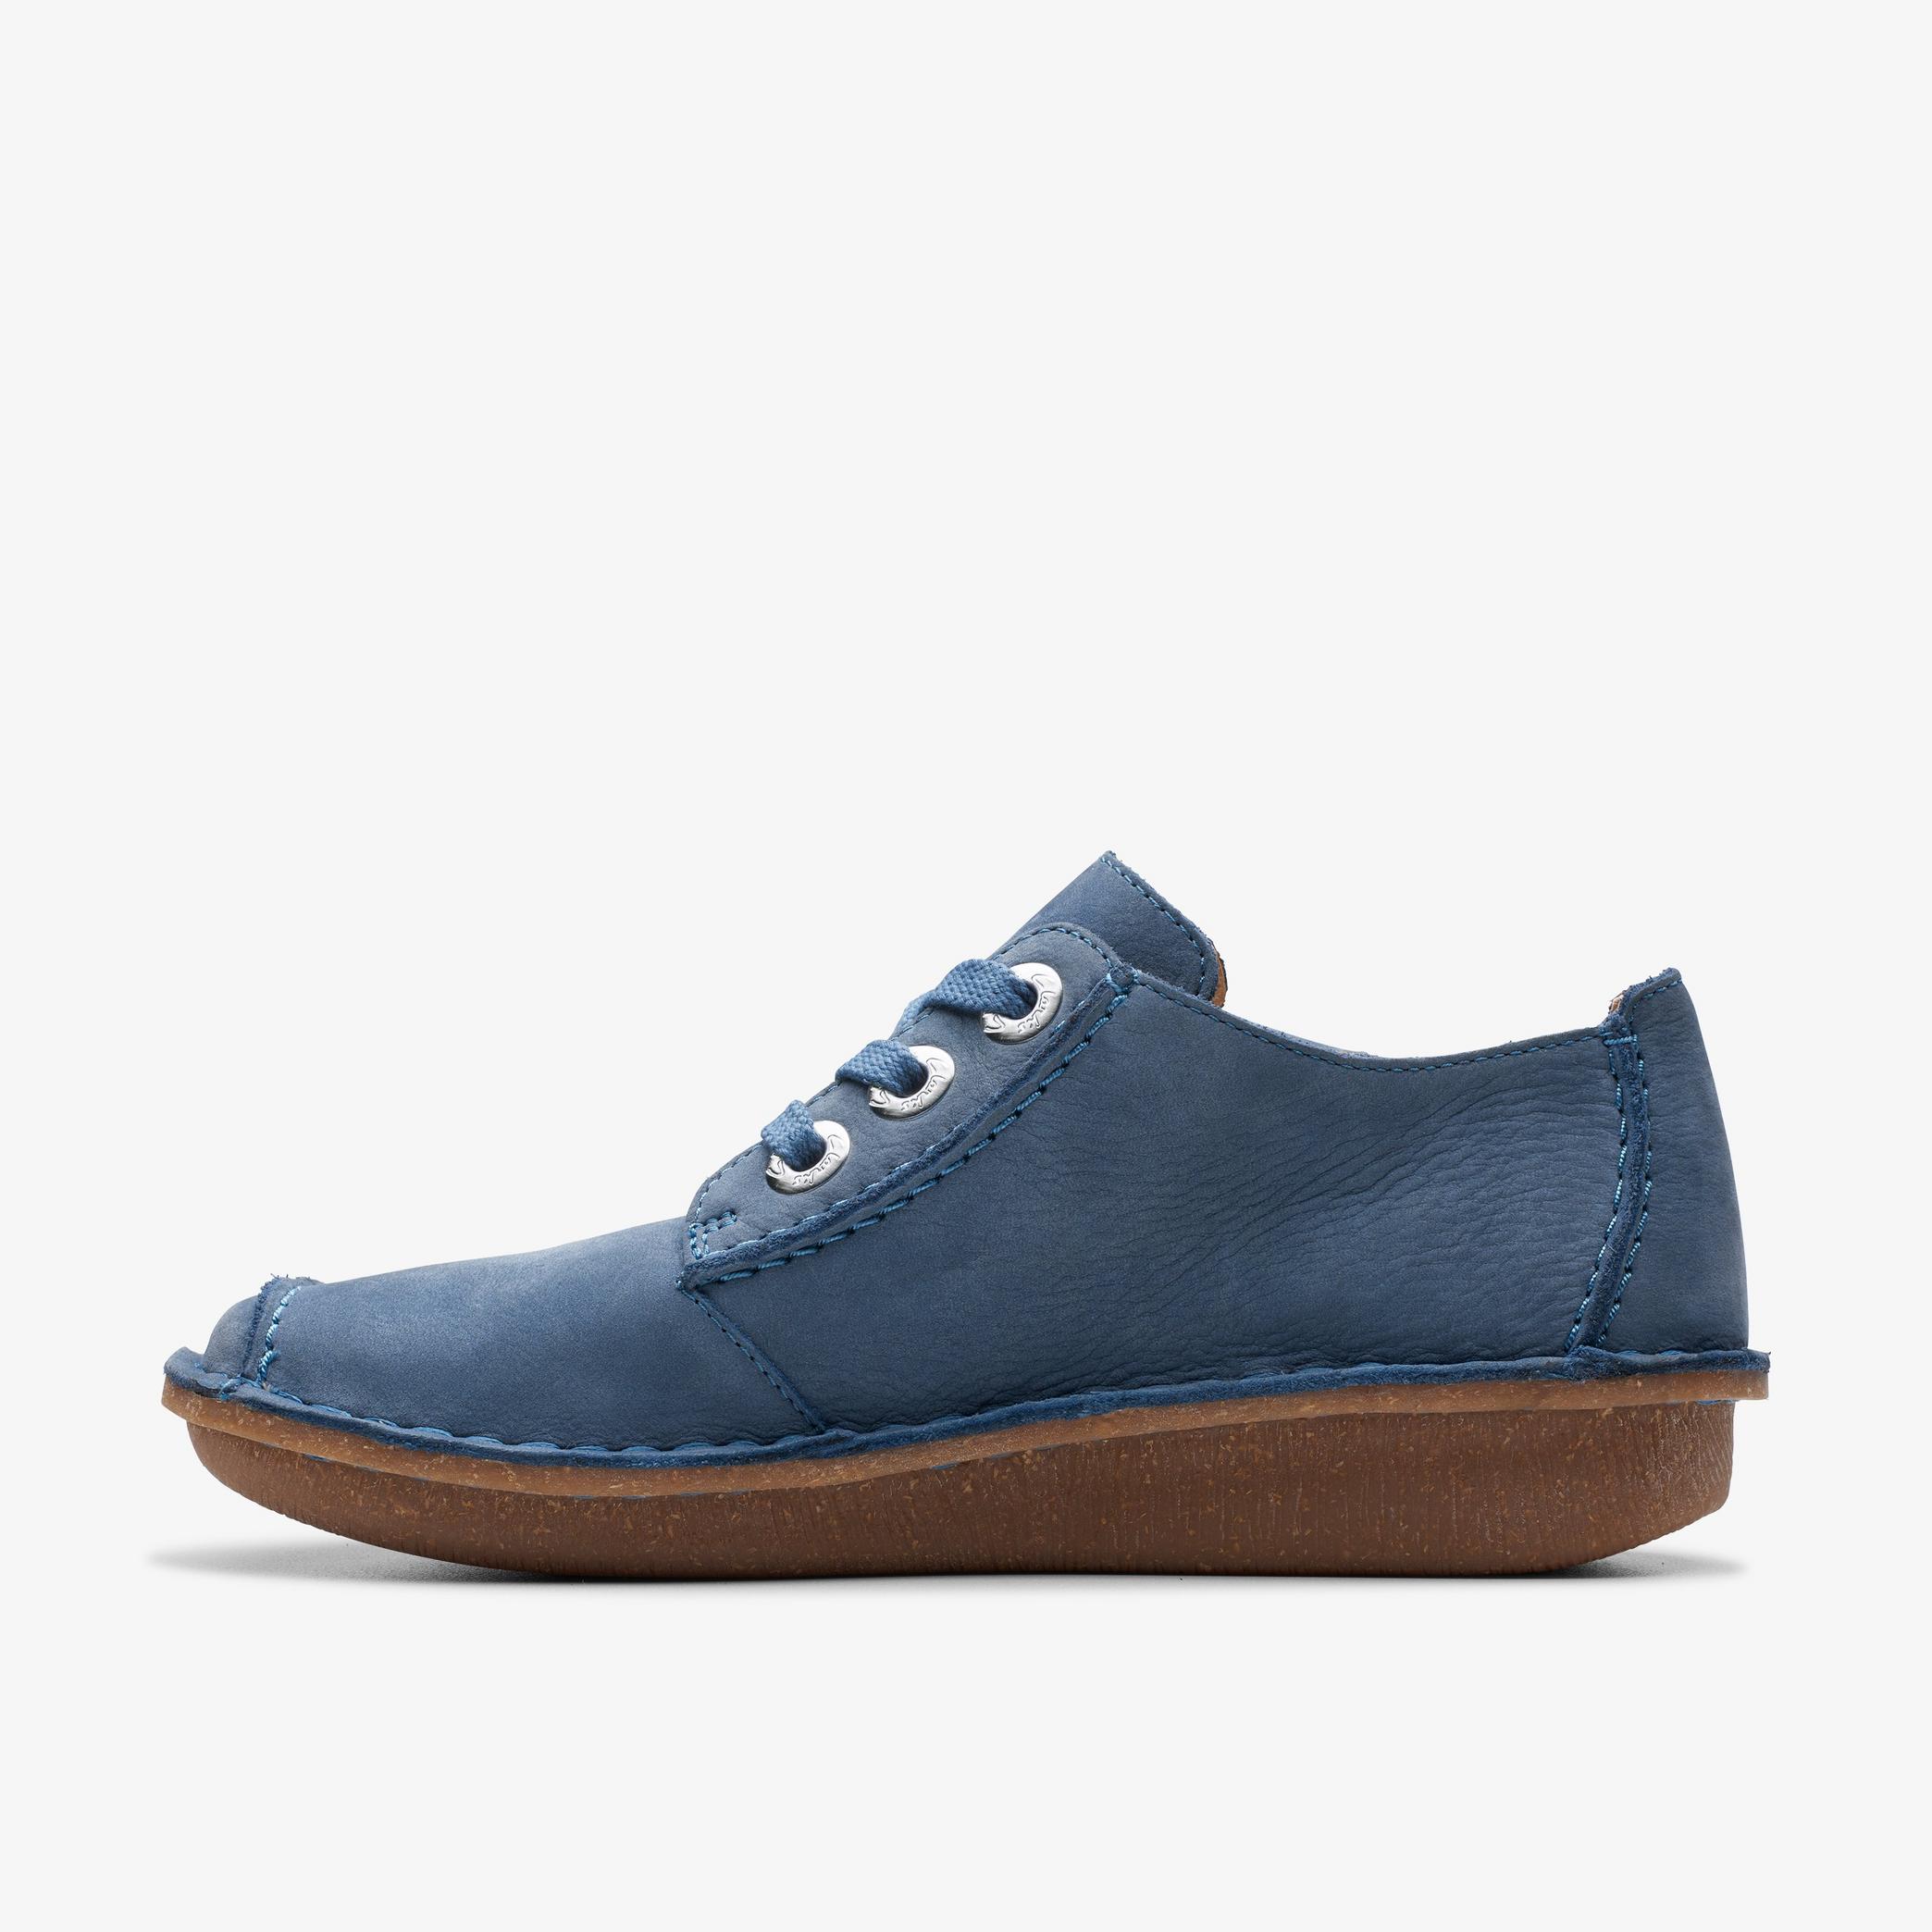 Funny Dream Blue Nubuck Derby Shoes, view 2 of 6